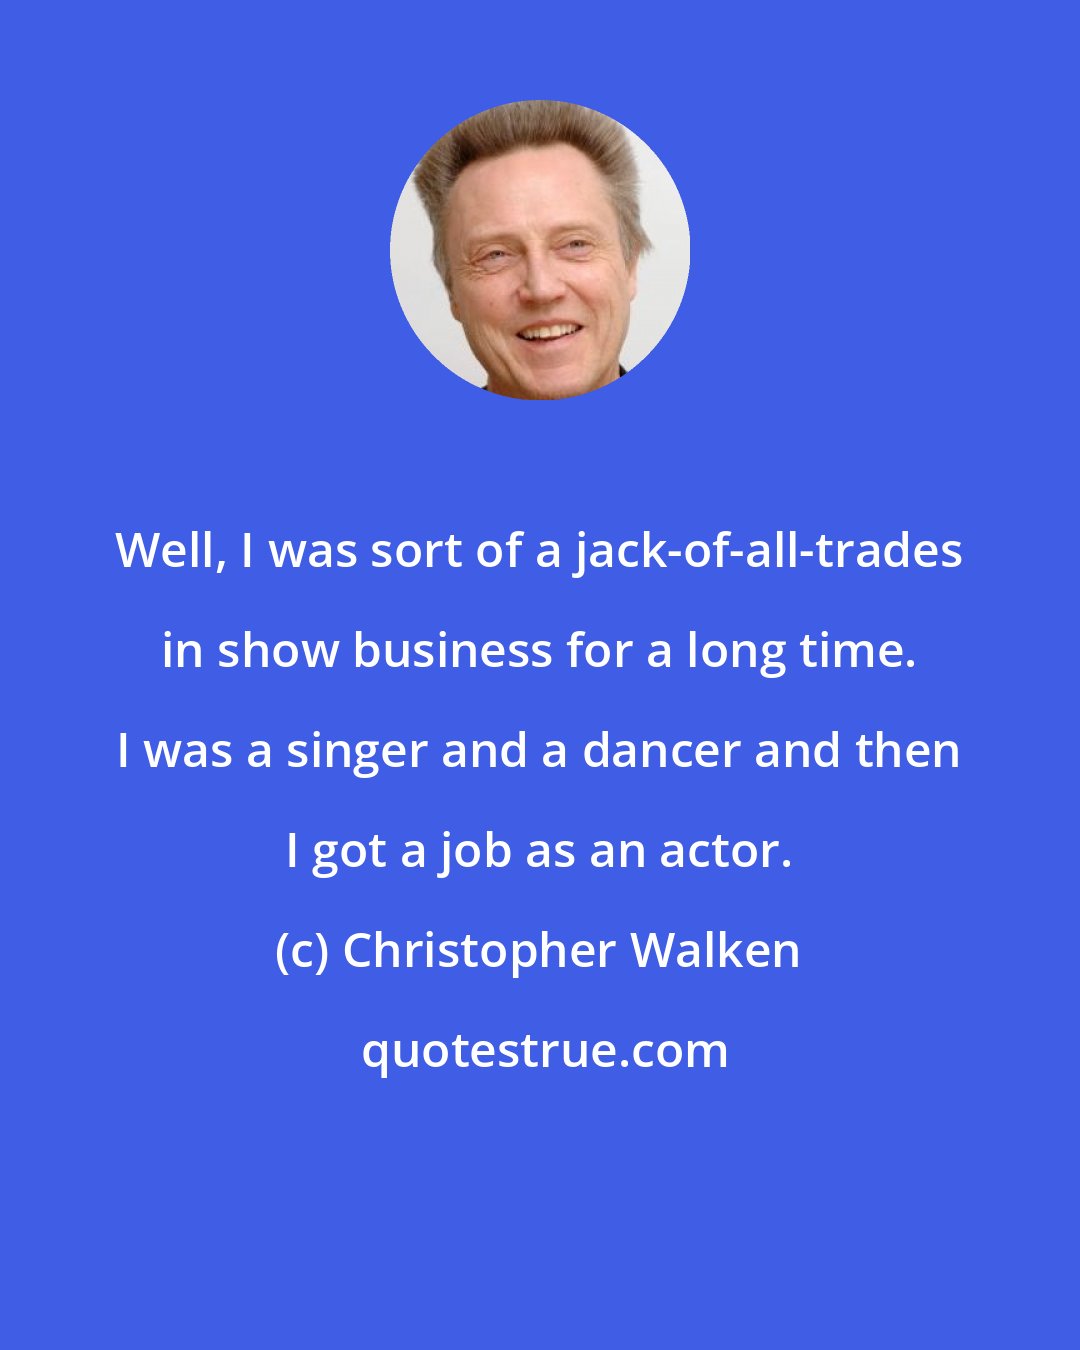 Christopher Walken: Well, I was sort of a jack-of-all-trades in show business for a long time. I was a singer and a dancer and then I got a job as an actor.